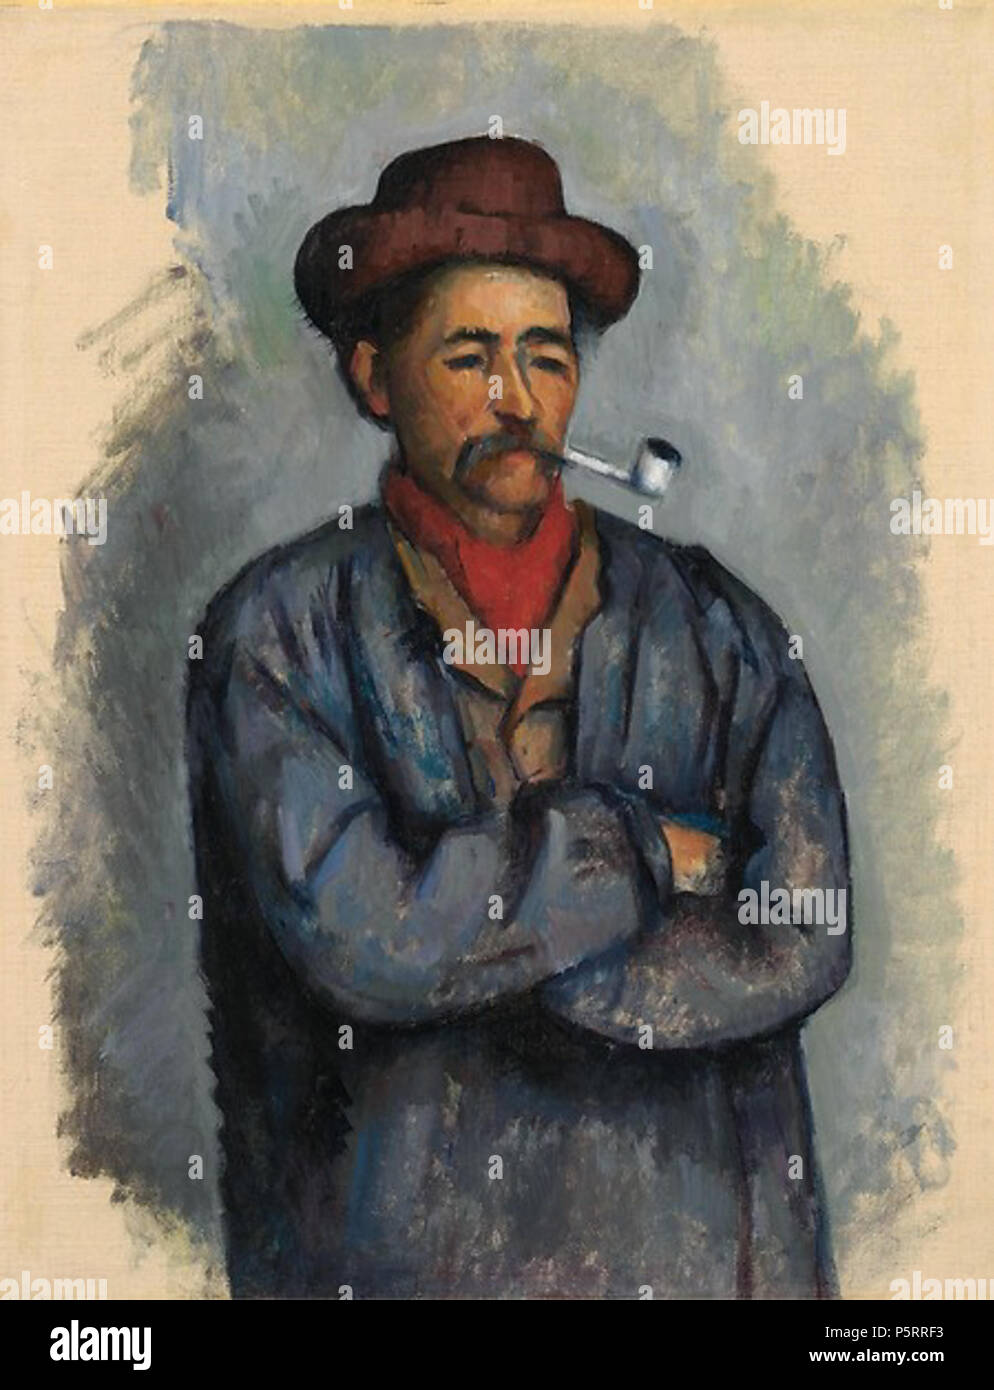 N/A.  English: Man with a Pipe (Study for The Card Players) by Paul Cézanne, oil on canvas 15 3/8 x 11 7/8 in. (39 x 30.2 cm) . 1890-92.    Paul Cézanne  (1839–1906)       Alternative names Cézanne; Paul Cezanne; Cezanne  Description French painter  Date of birth/death 19 January 1839 22 October 1906  Location of birth/death Aix-en-Provence Aix-en-Provence  Work location Paris, Auvers-sur-Oise, Aix-en-Provence, Marseille  Authority control  : Q35548 VIAF:39374836 ISNI:0000 0001 2128 7379 ULAN:500004793 LCCN:n79055446 NLA:35026986 WorldCat 271 Cardplayers study bloch collection Stock Photo